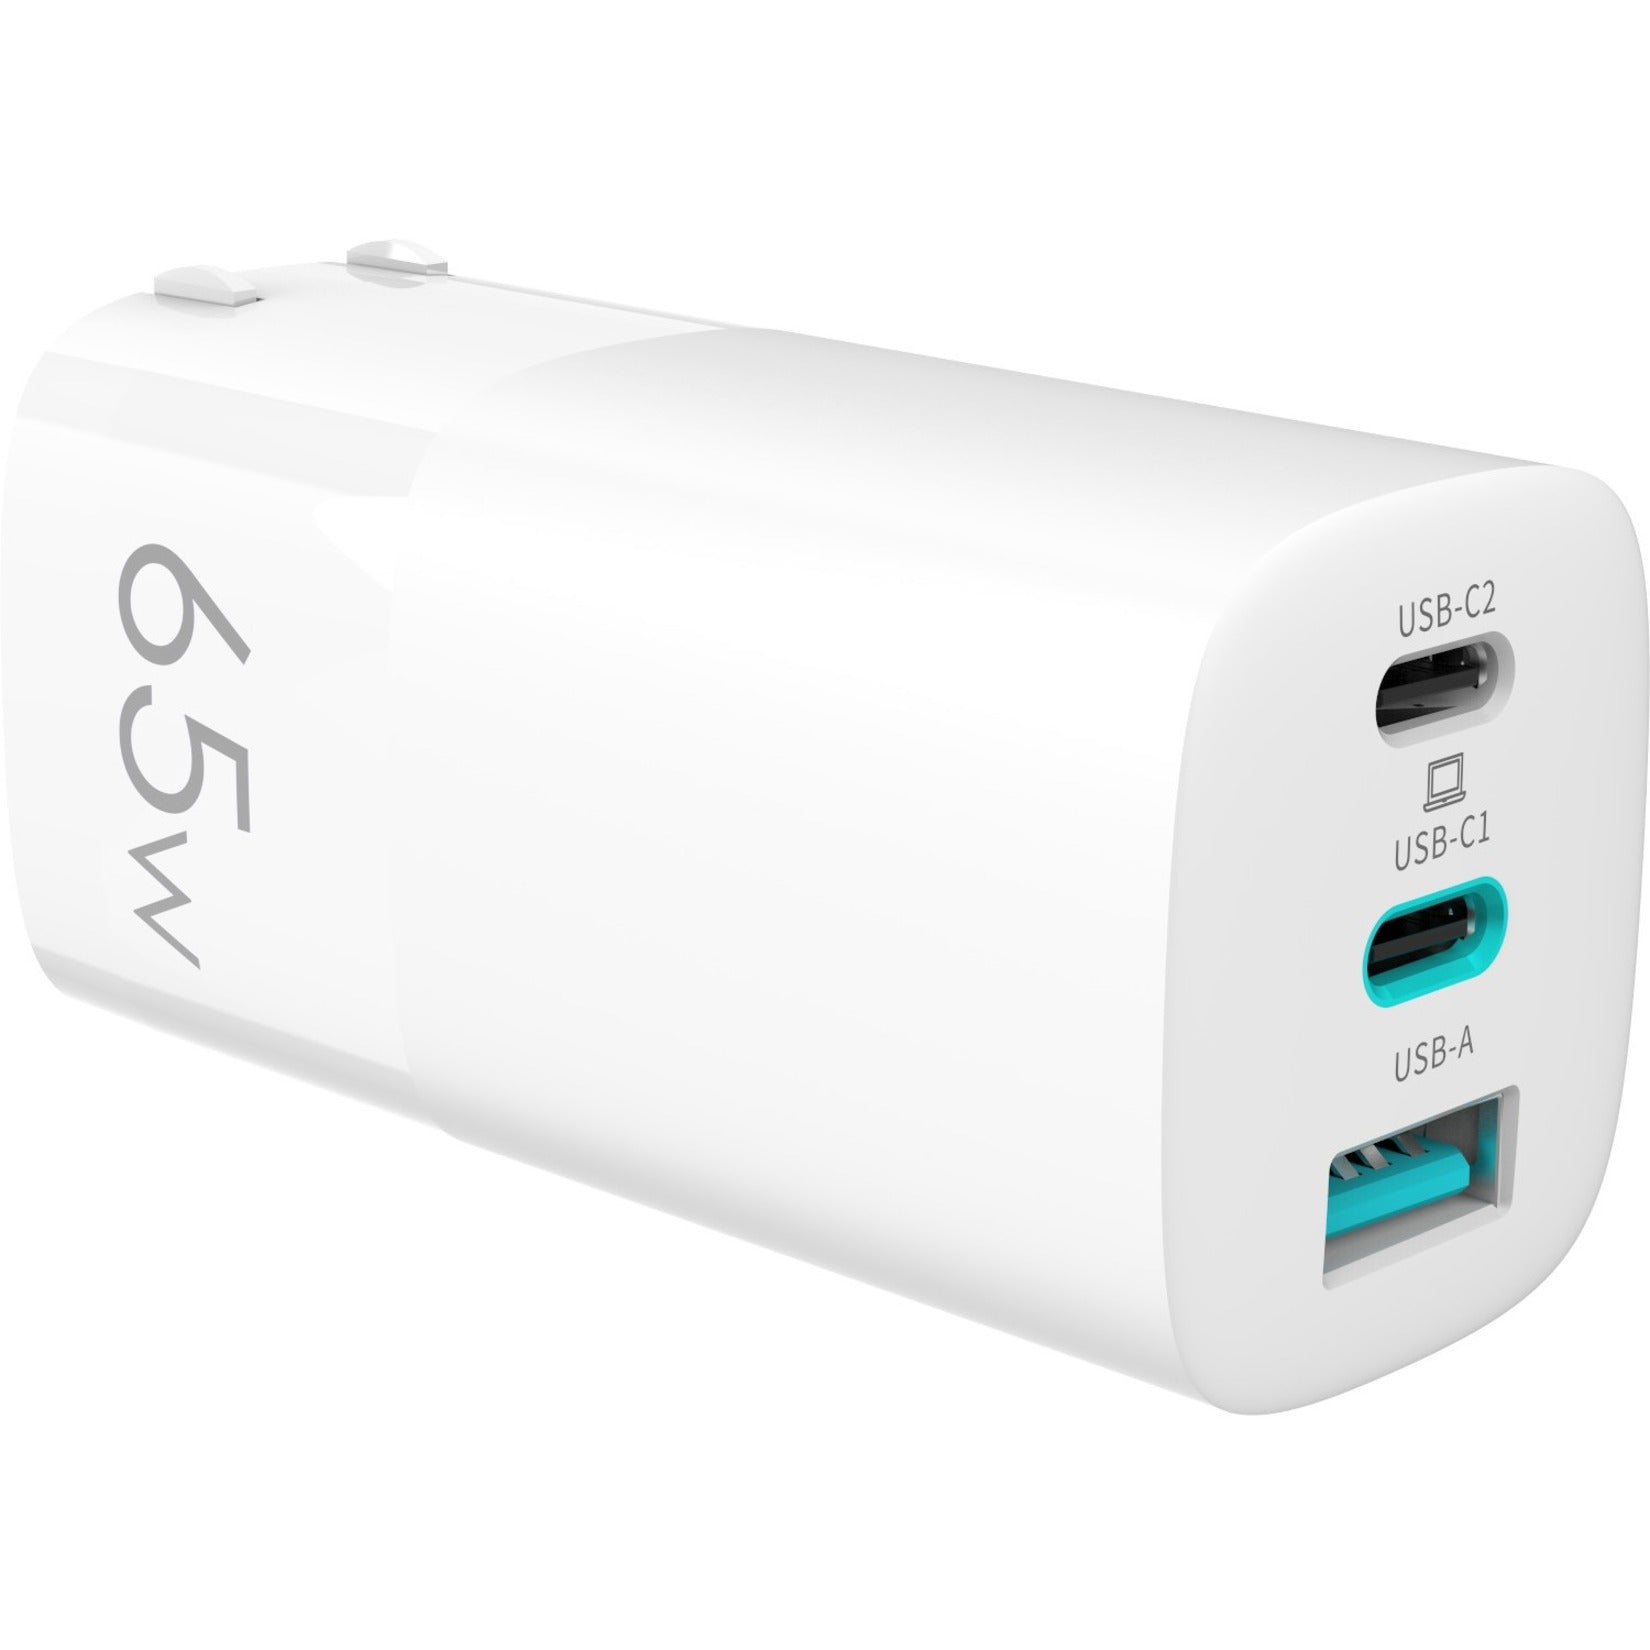 4XEM 4XGAN00165WW 65W Wall Charger Triple Output - White, Fast Charging for Multiple Devices